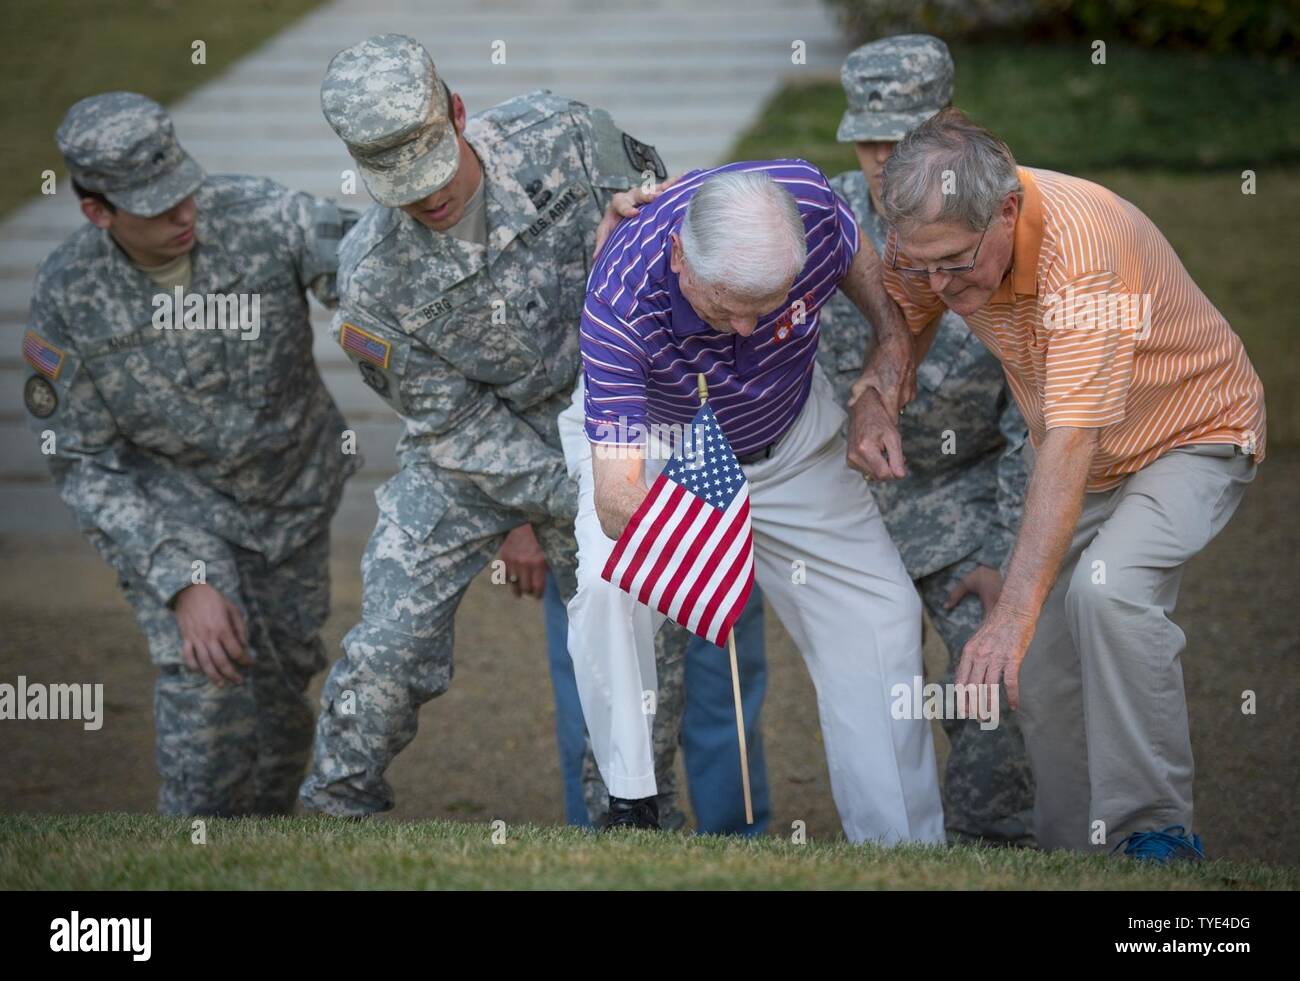 Retired U.S. Army Col. Ben Skardon, 99, a survivor of the Bataan Death March, gets help placing a flag on Otis Morgan’s stone on Clemson University’s Scroll of Honor, Nov. 3. 2016. Morgan was a fellow Clemson alum who helped save Skardon’s life while they were both interred in a Japanese prisoner of war camp. Morgan did not survive the war. Stock Photo